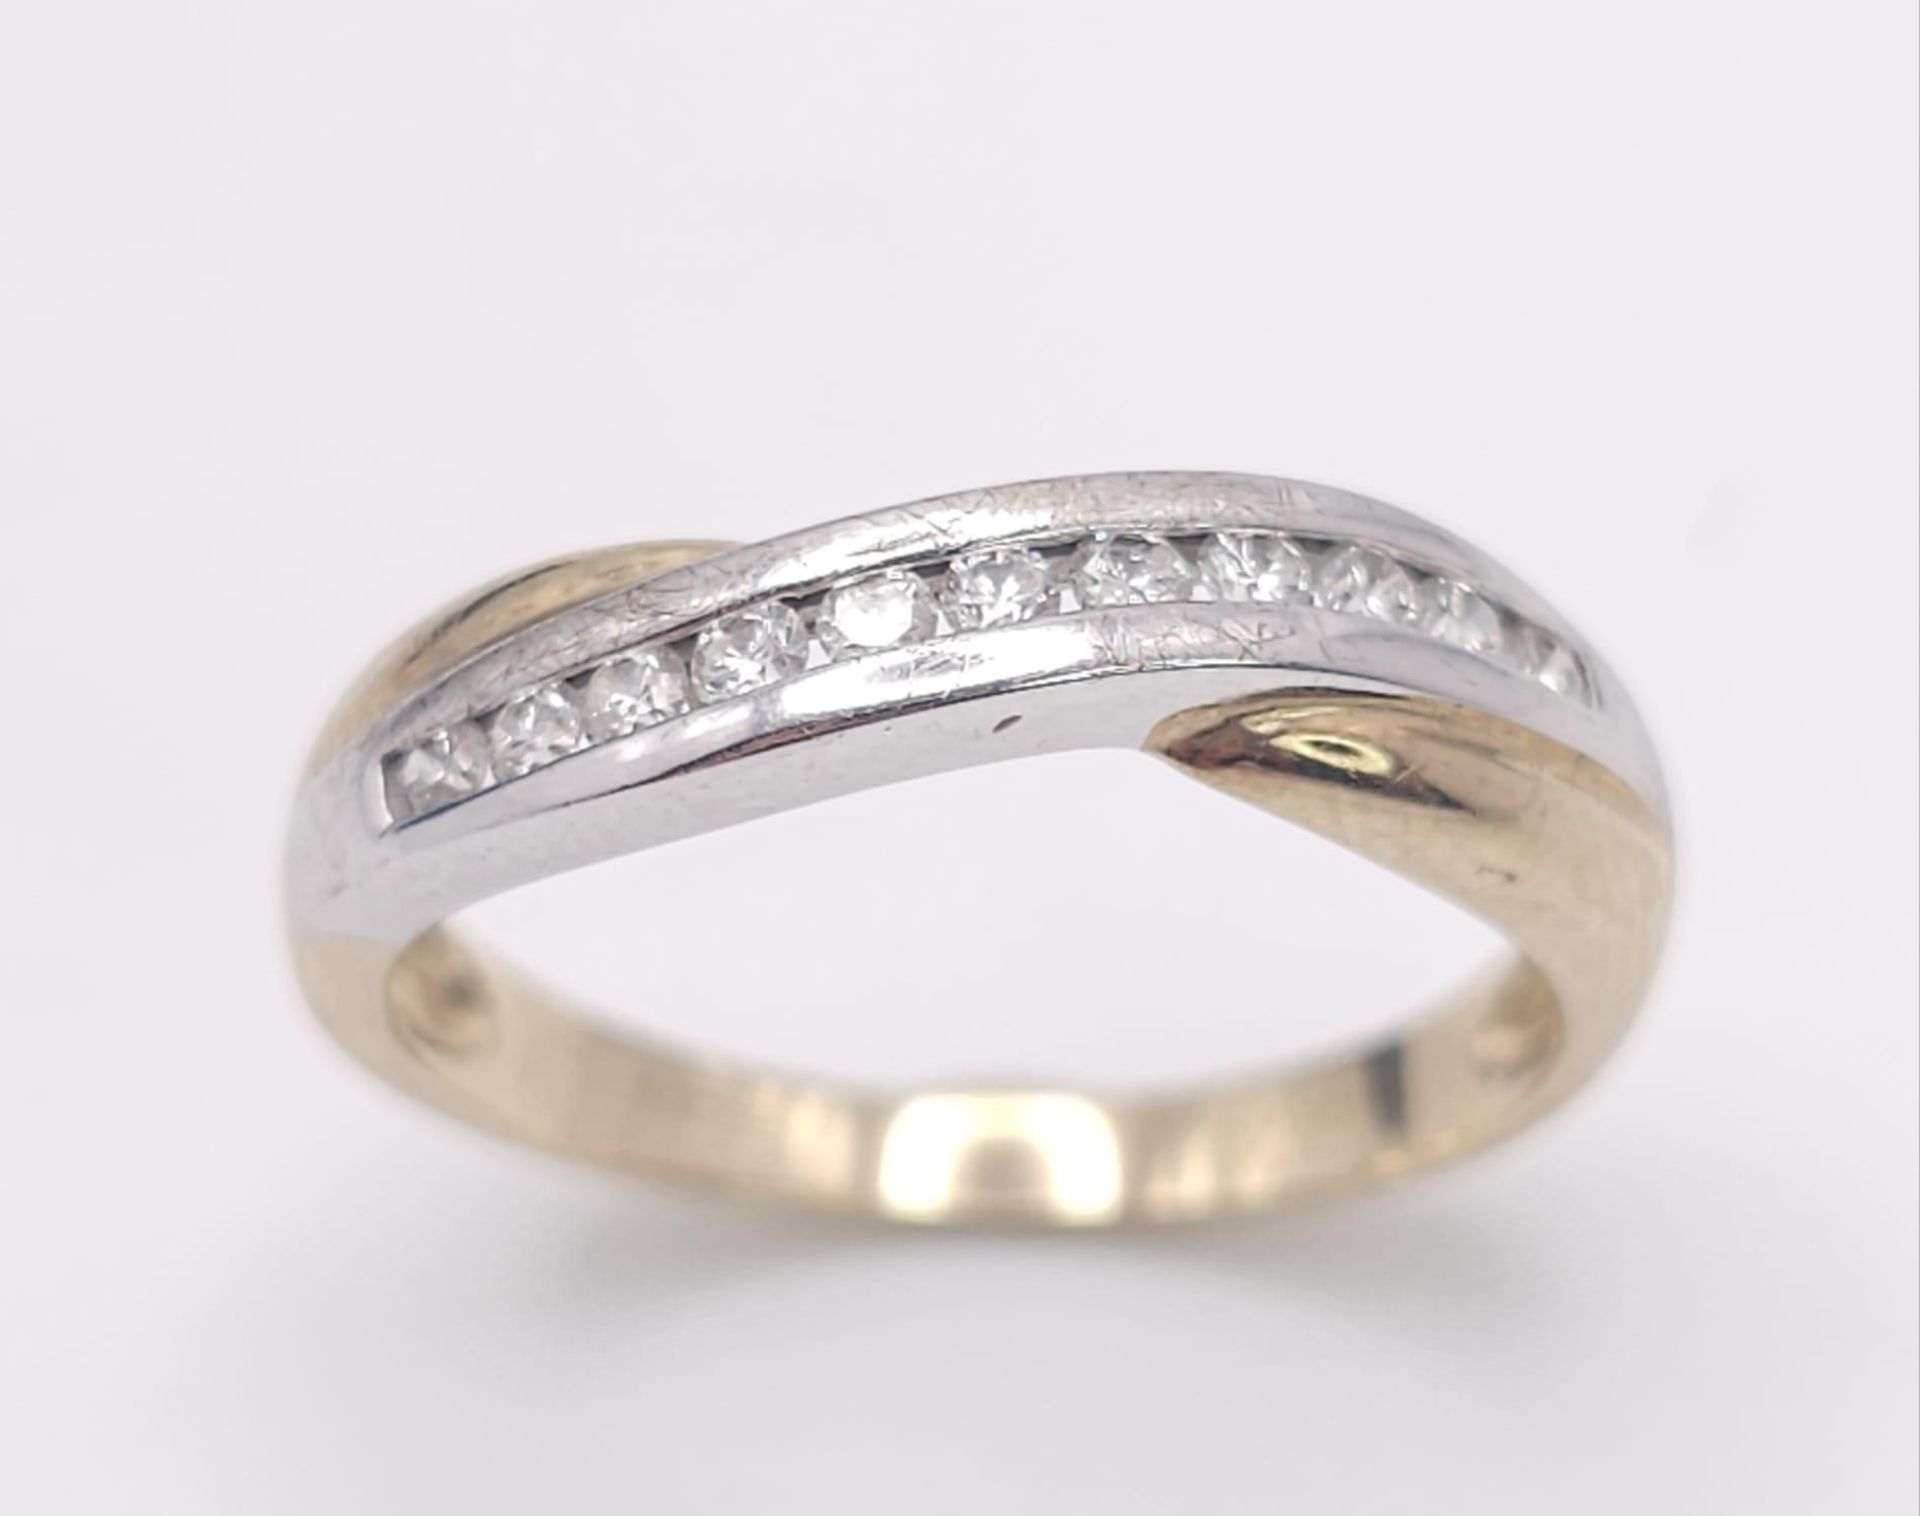 A 9K Yellow Gold and Diamond Half-Eternity Ring. 0.22ctw. 2.3g total weight. Size P.